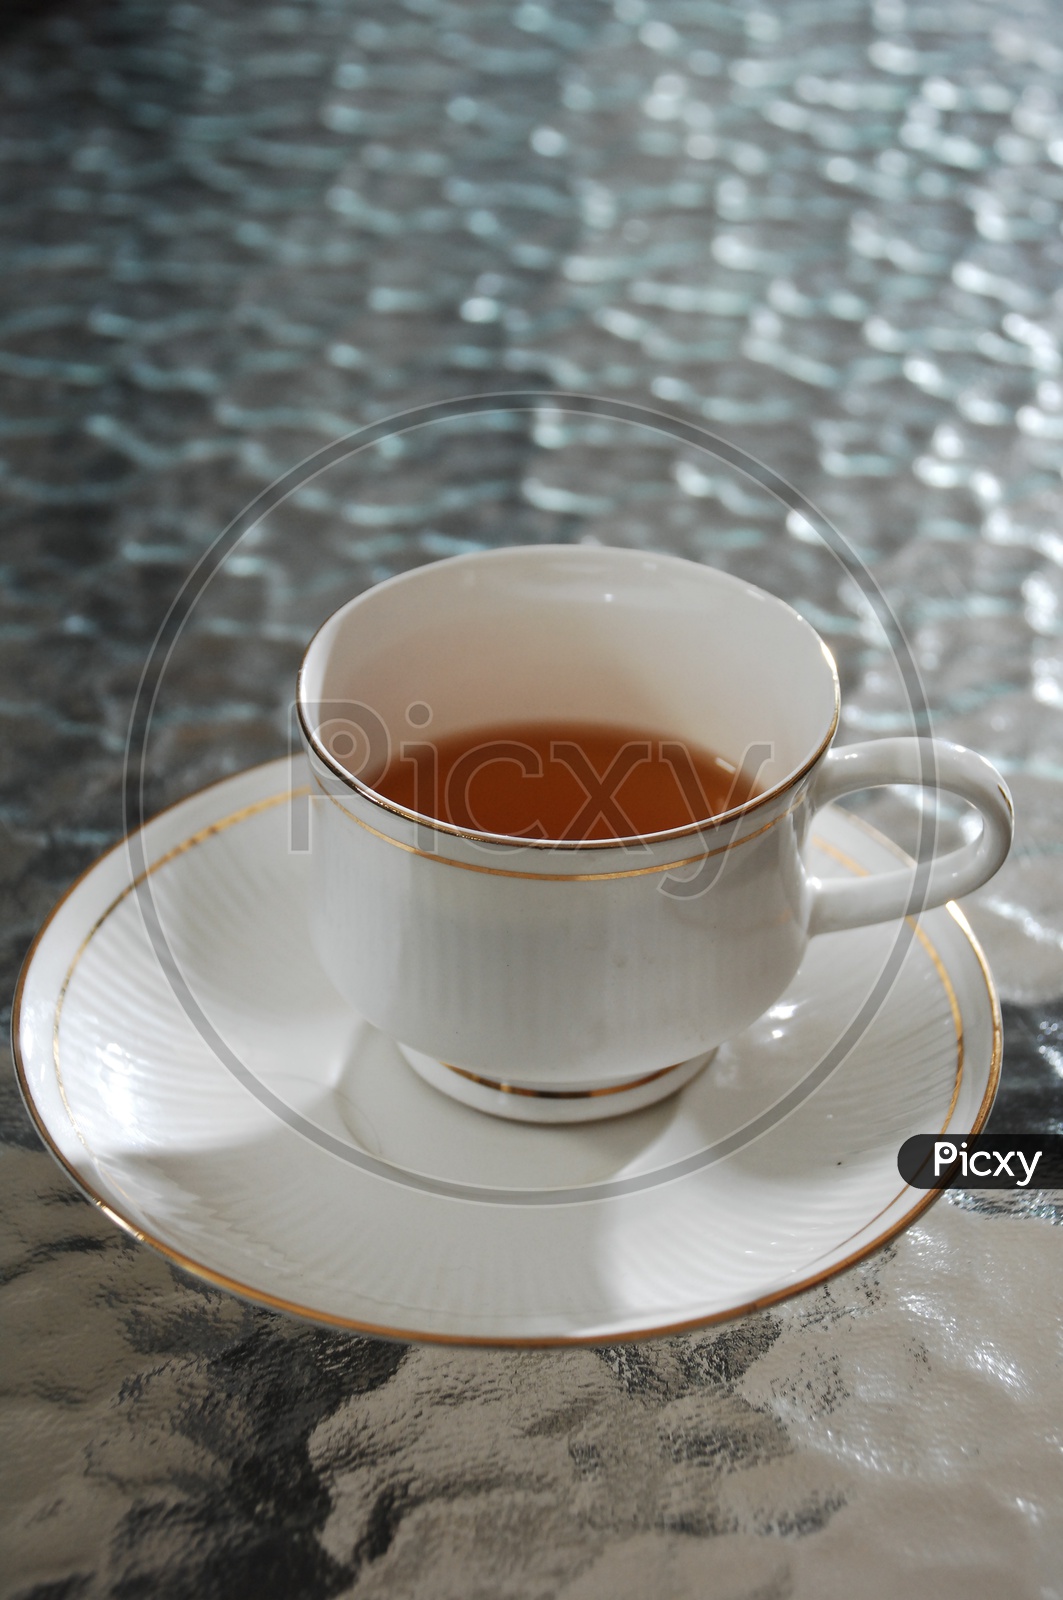 A ceramic white cup of black tea on a saucer